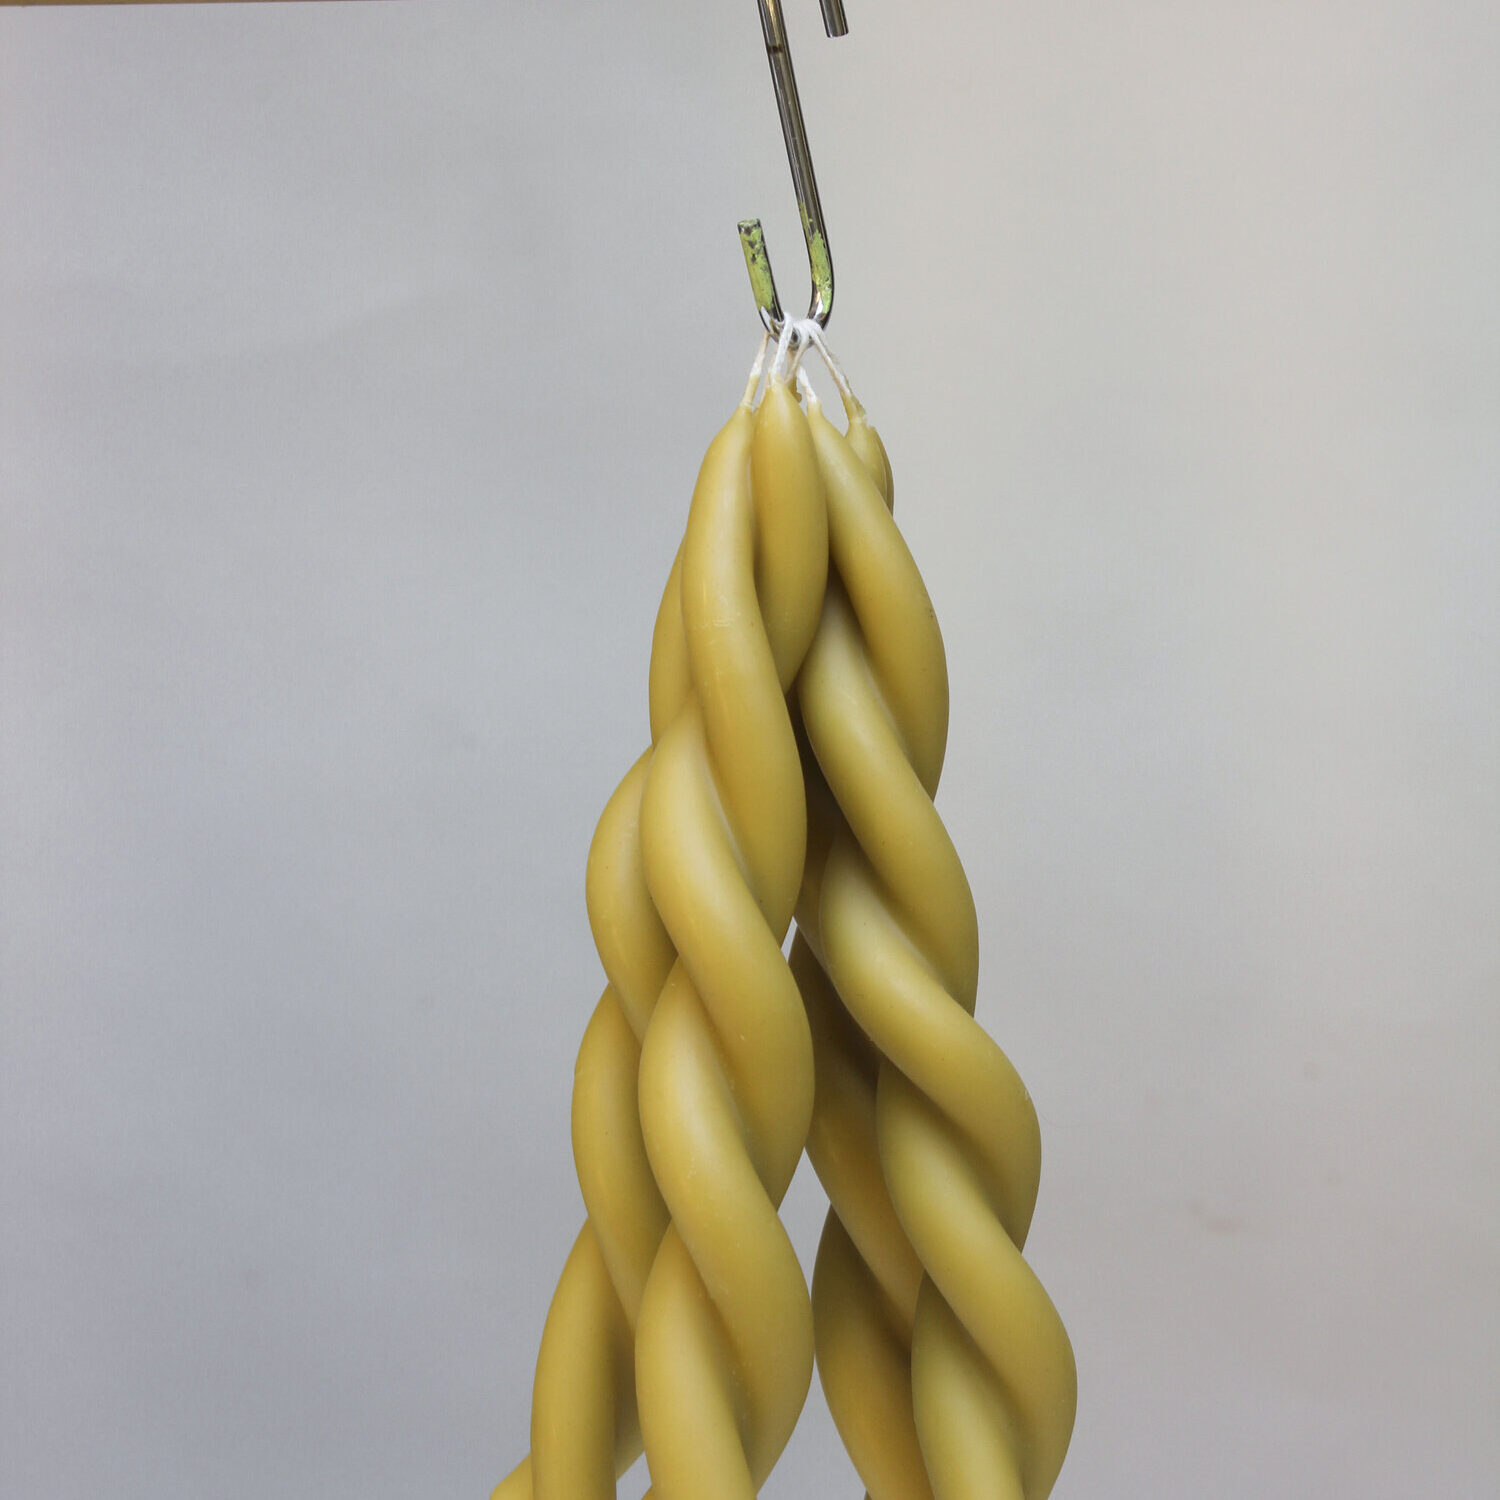 Beeswax Twisted Candle - Natural